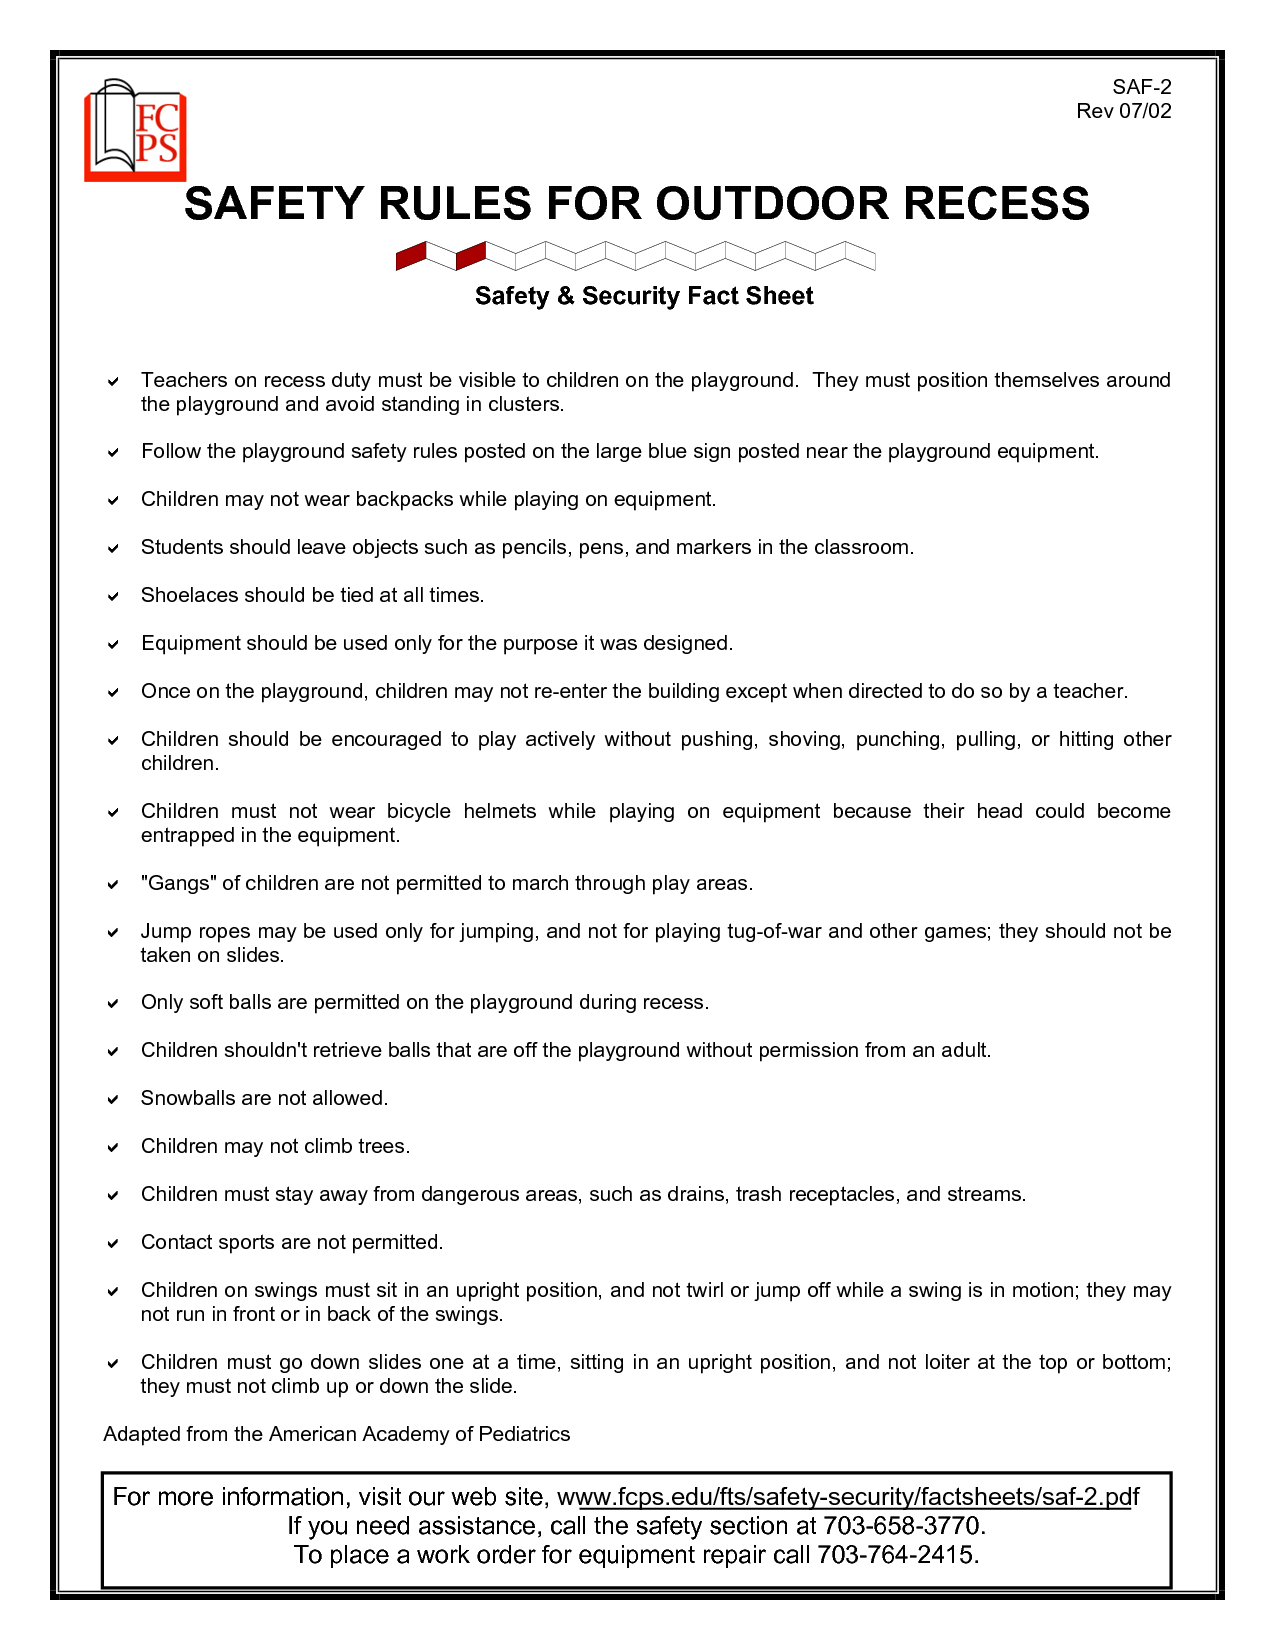 Outdoor Safety For Preschoolers | Safety Rules For Outdoor